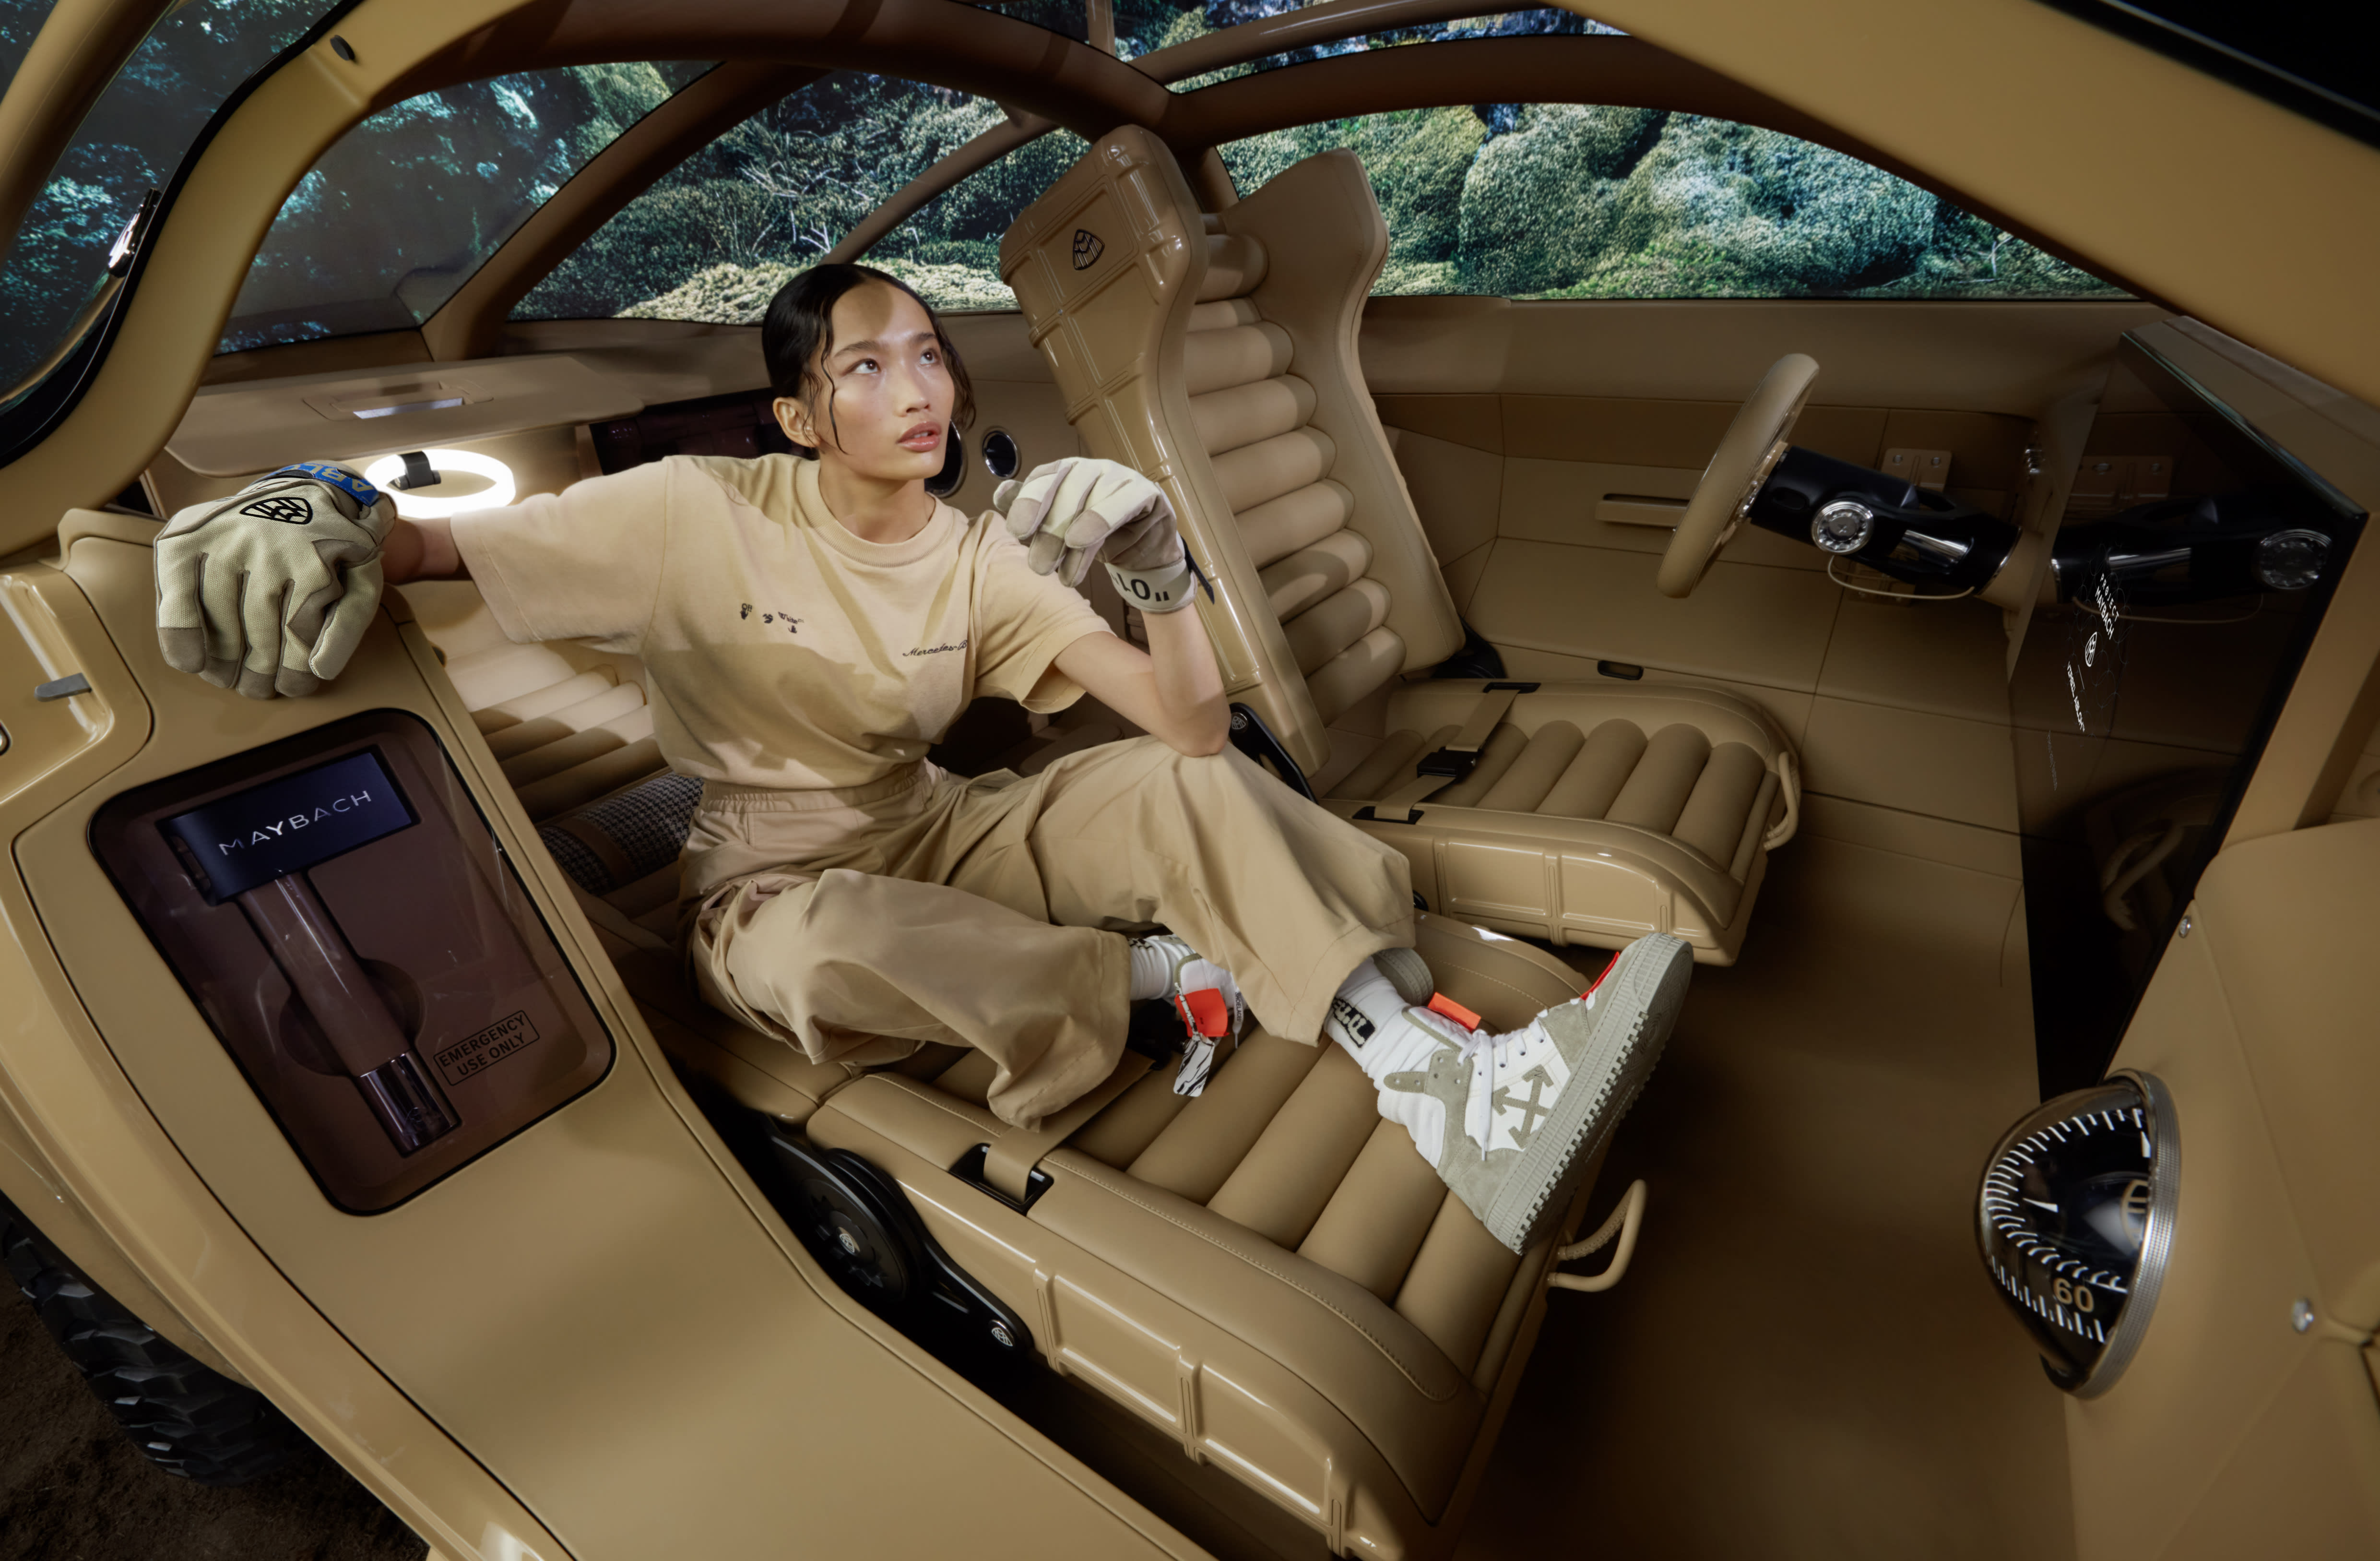 Virgil Abloh's Limited Edition Mercedes-Maybach Has Finally